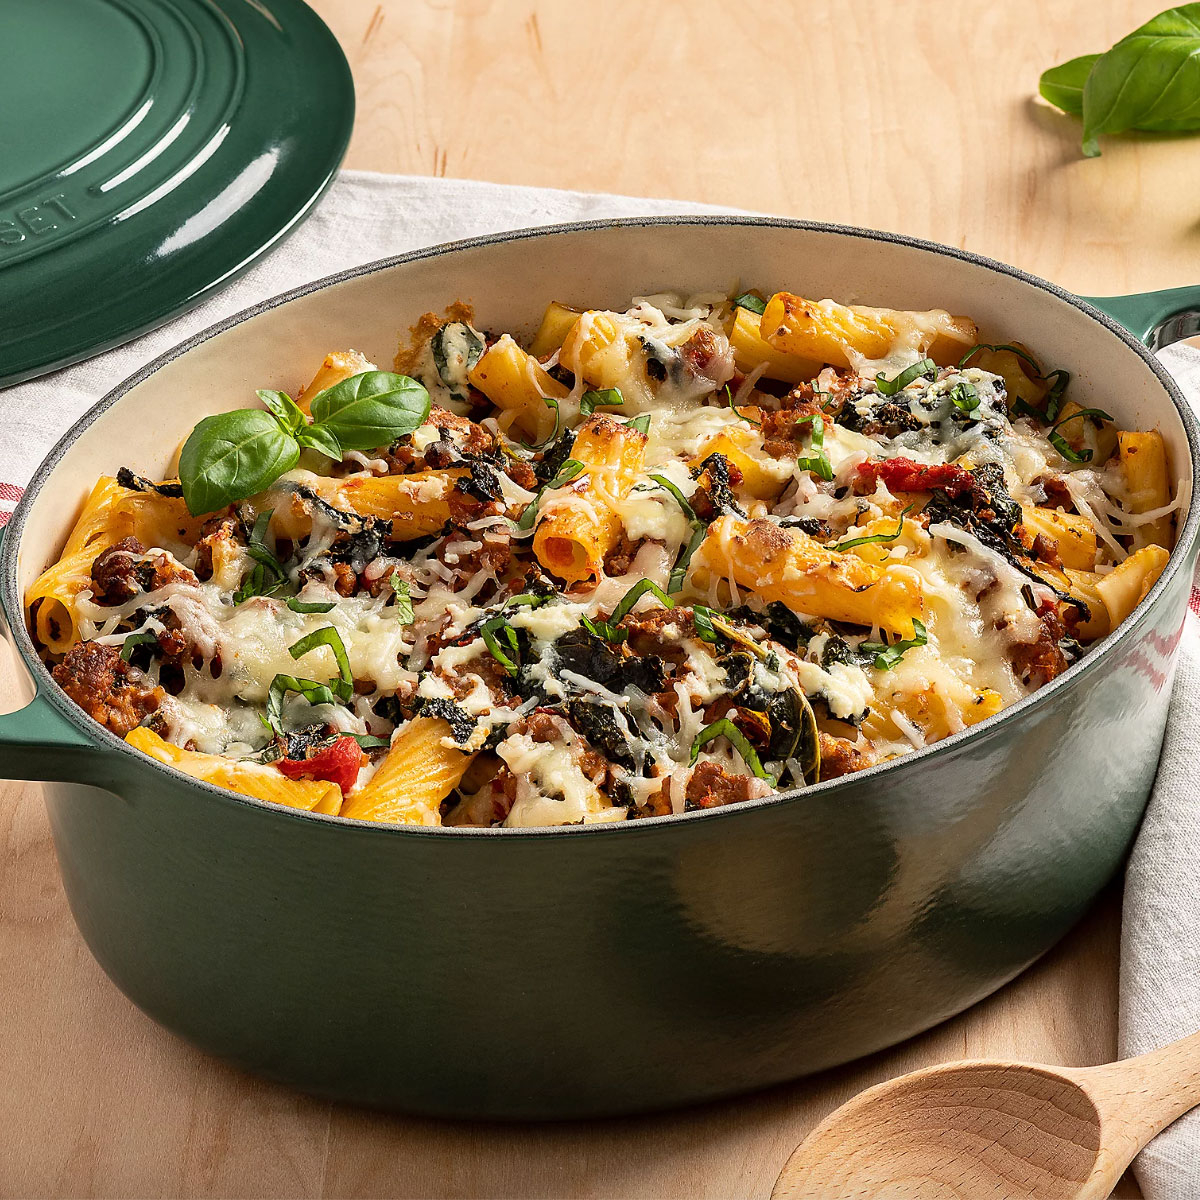 Rare Deal Alert: Save 53% On the Iconic Le Creuset Cast Iron Pan